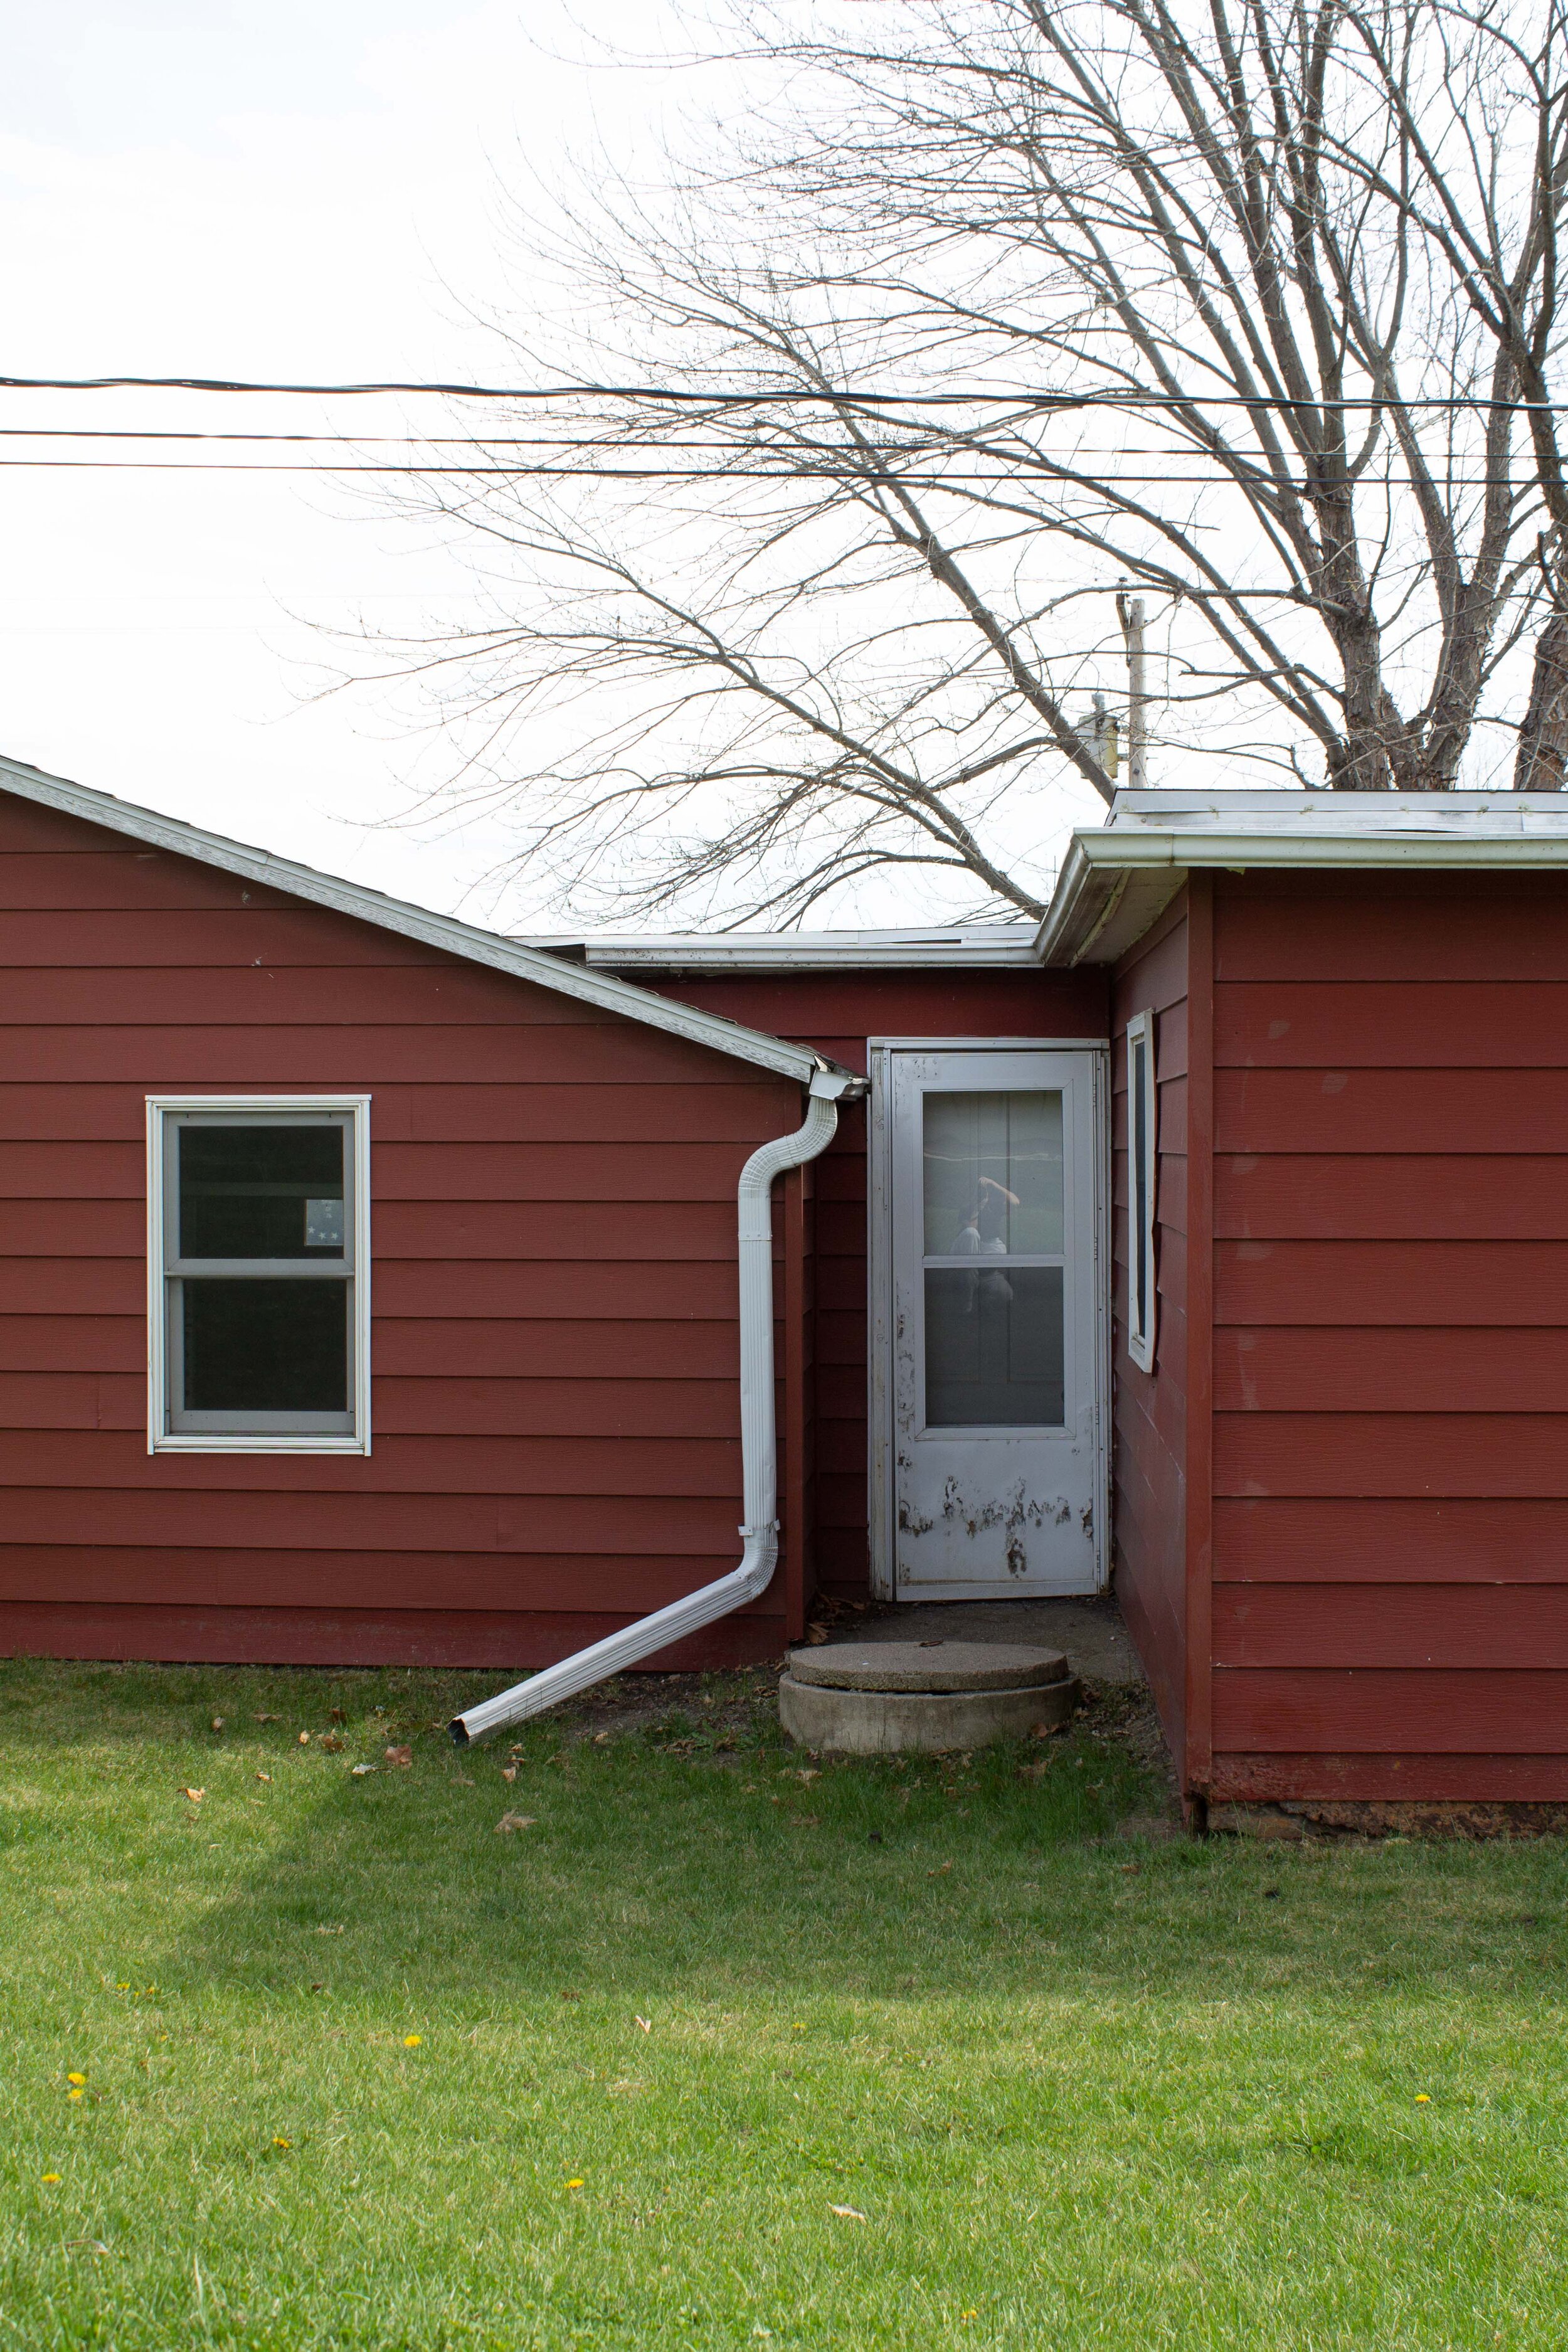 Exterior Update: Swapping a door for a window in the passthrough. Exterior window and cedar shake plans. | Nadine Stay